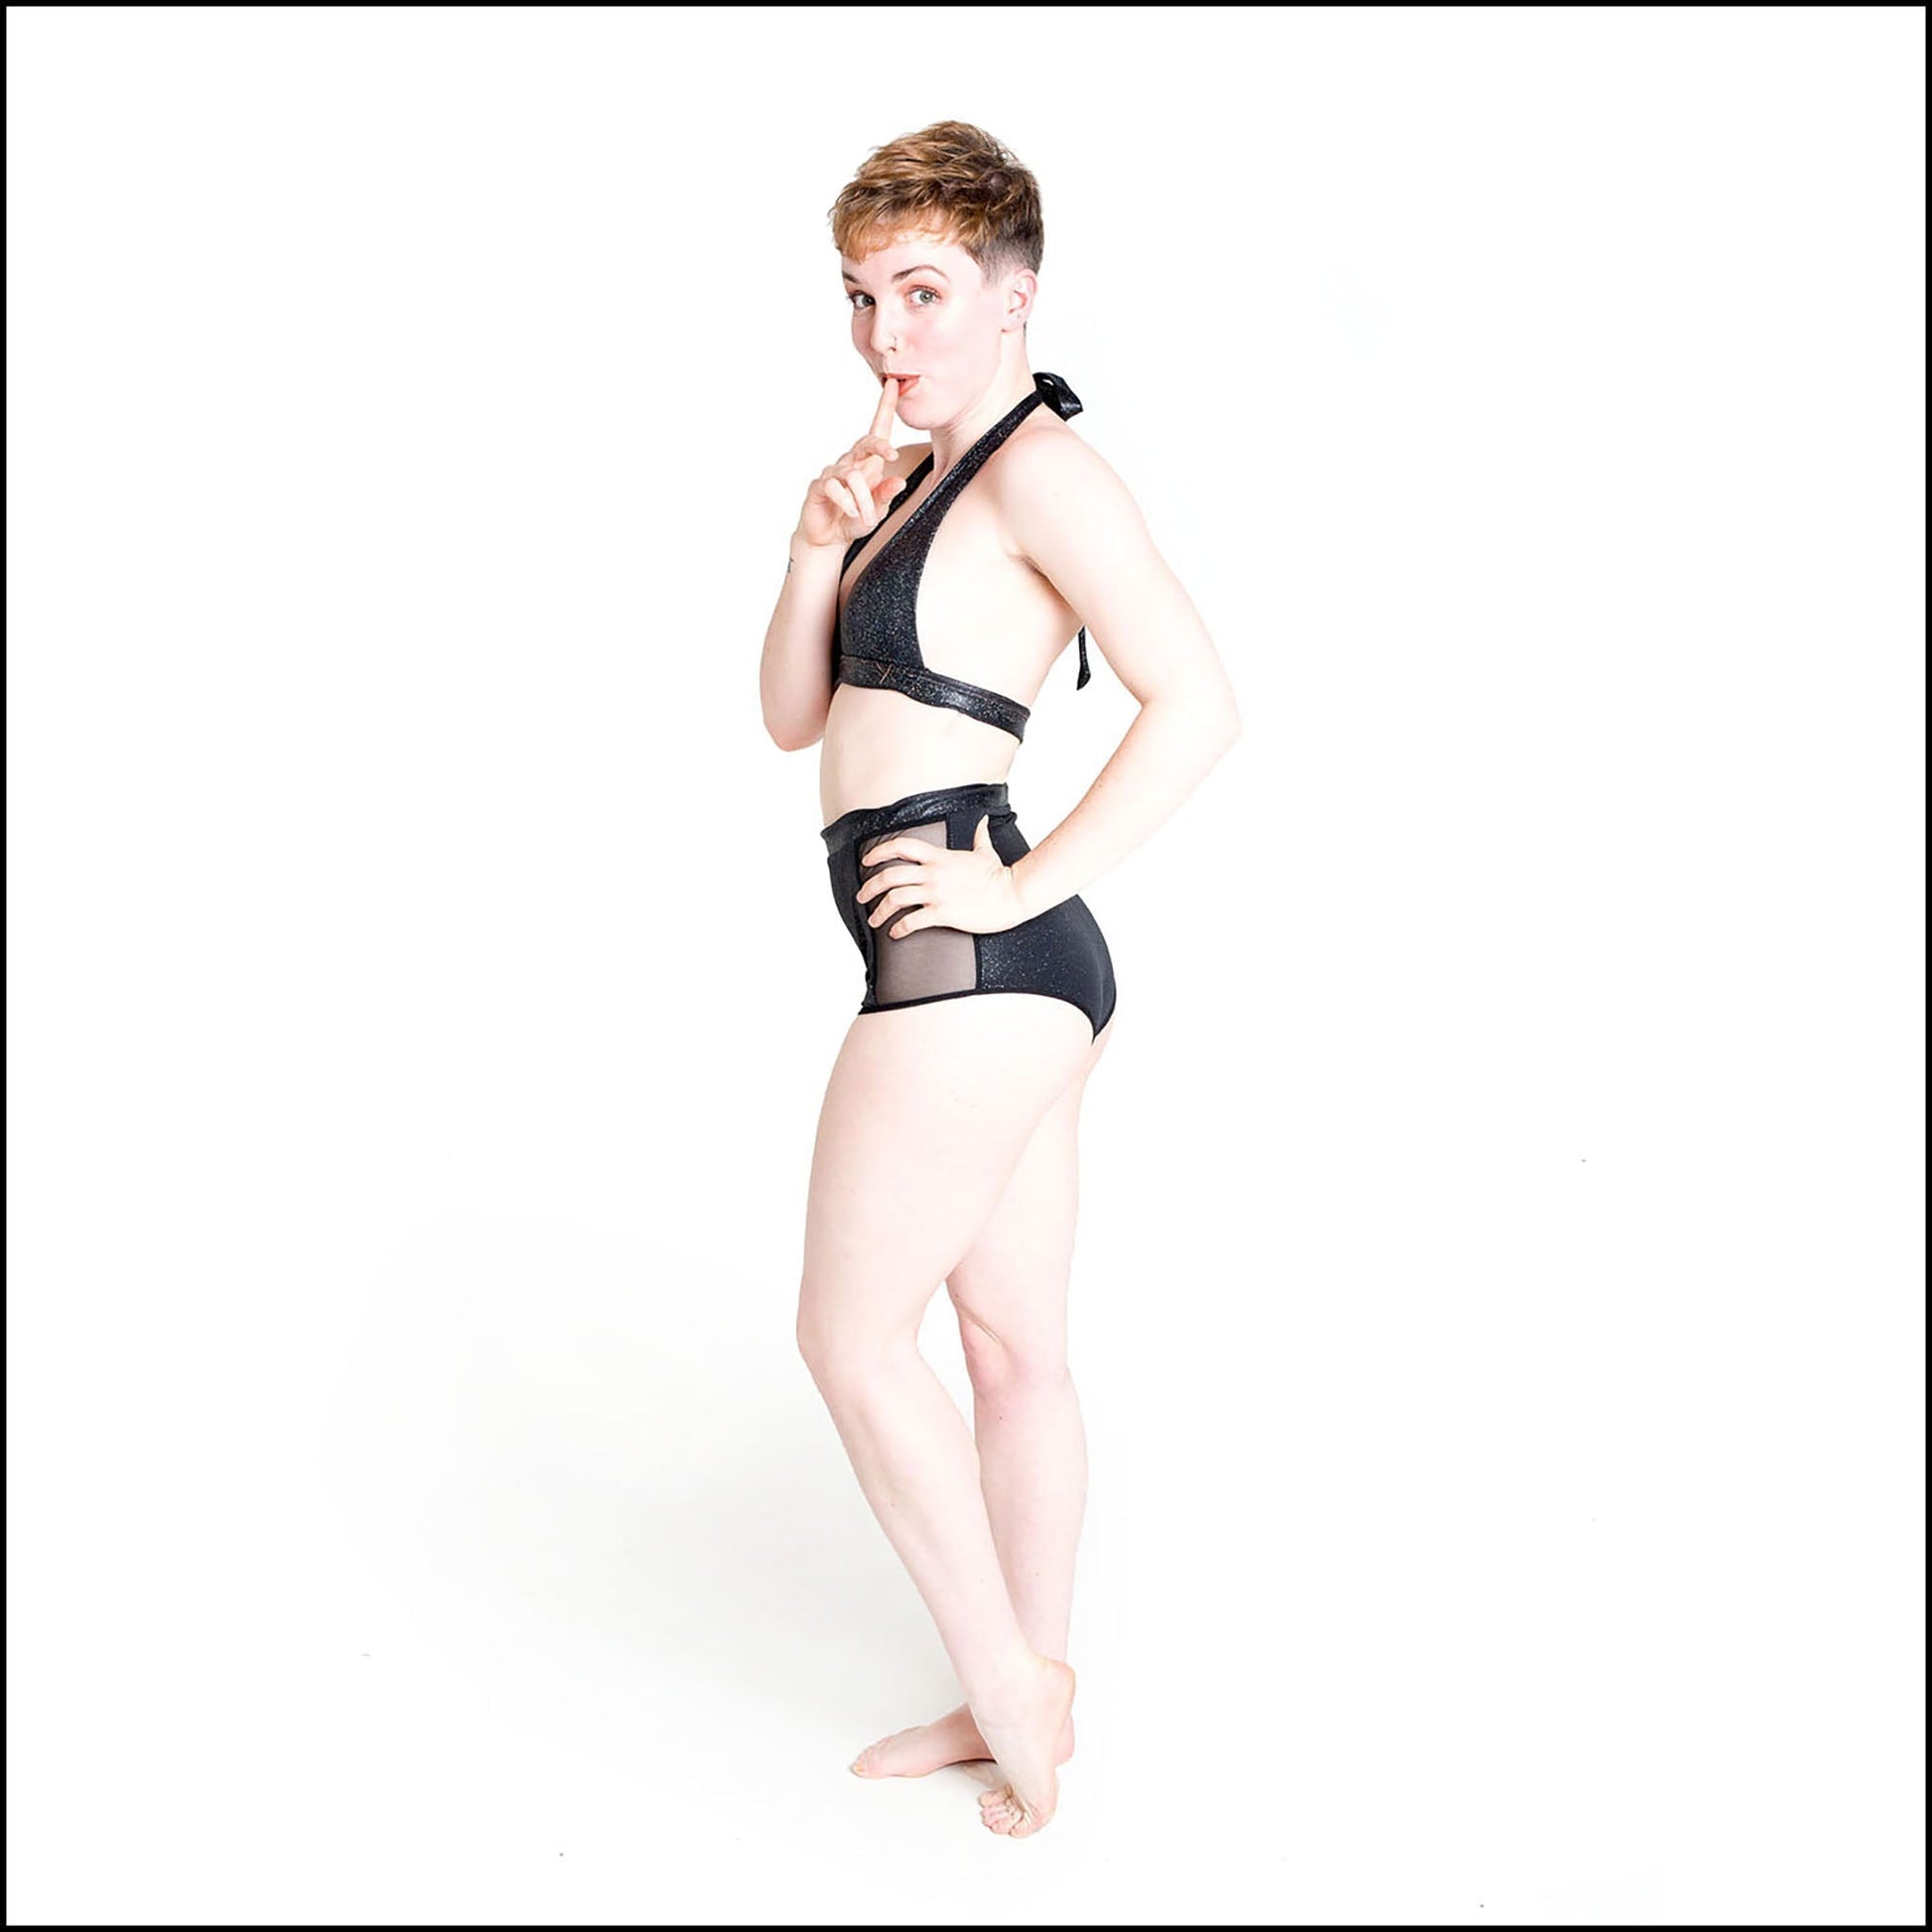 Cosmic Bikini in black hologram, foil printed spandex. The bikini features a tie halter neck top and high waist shorts bottoms with black mesh side panels. Side view. 